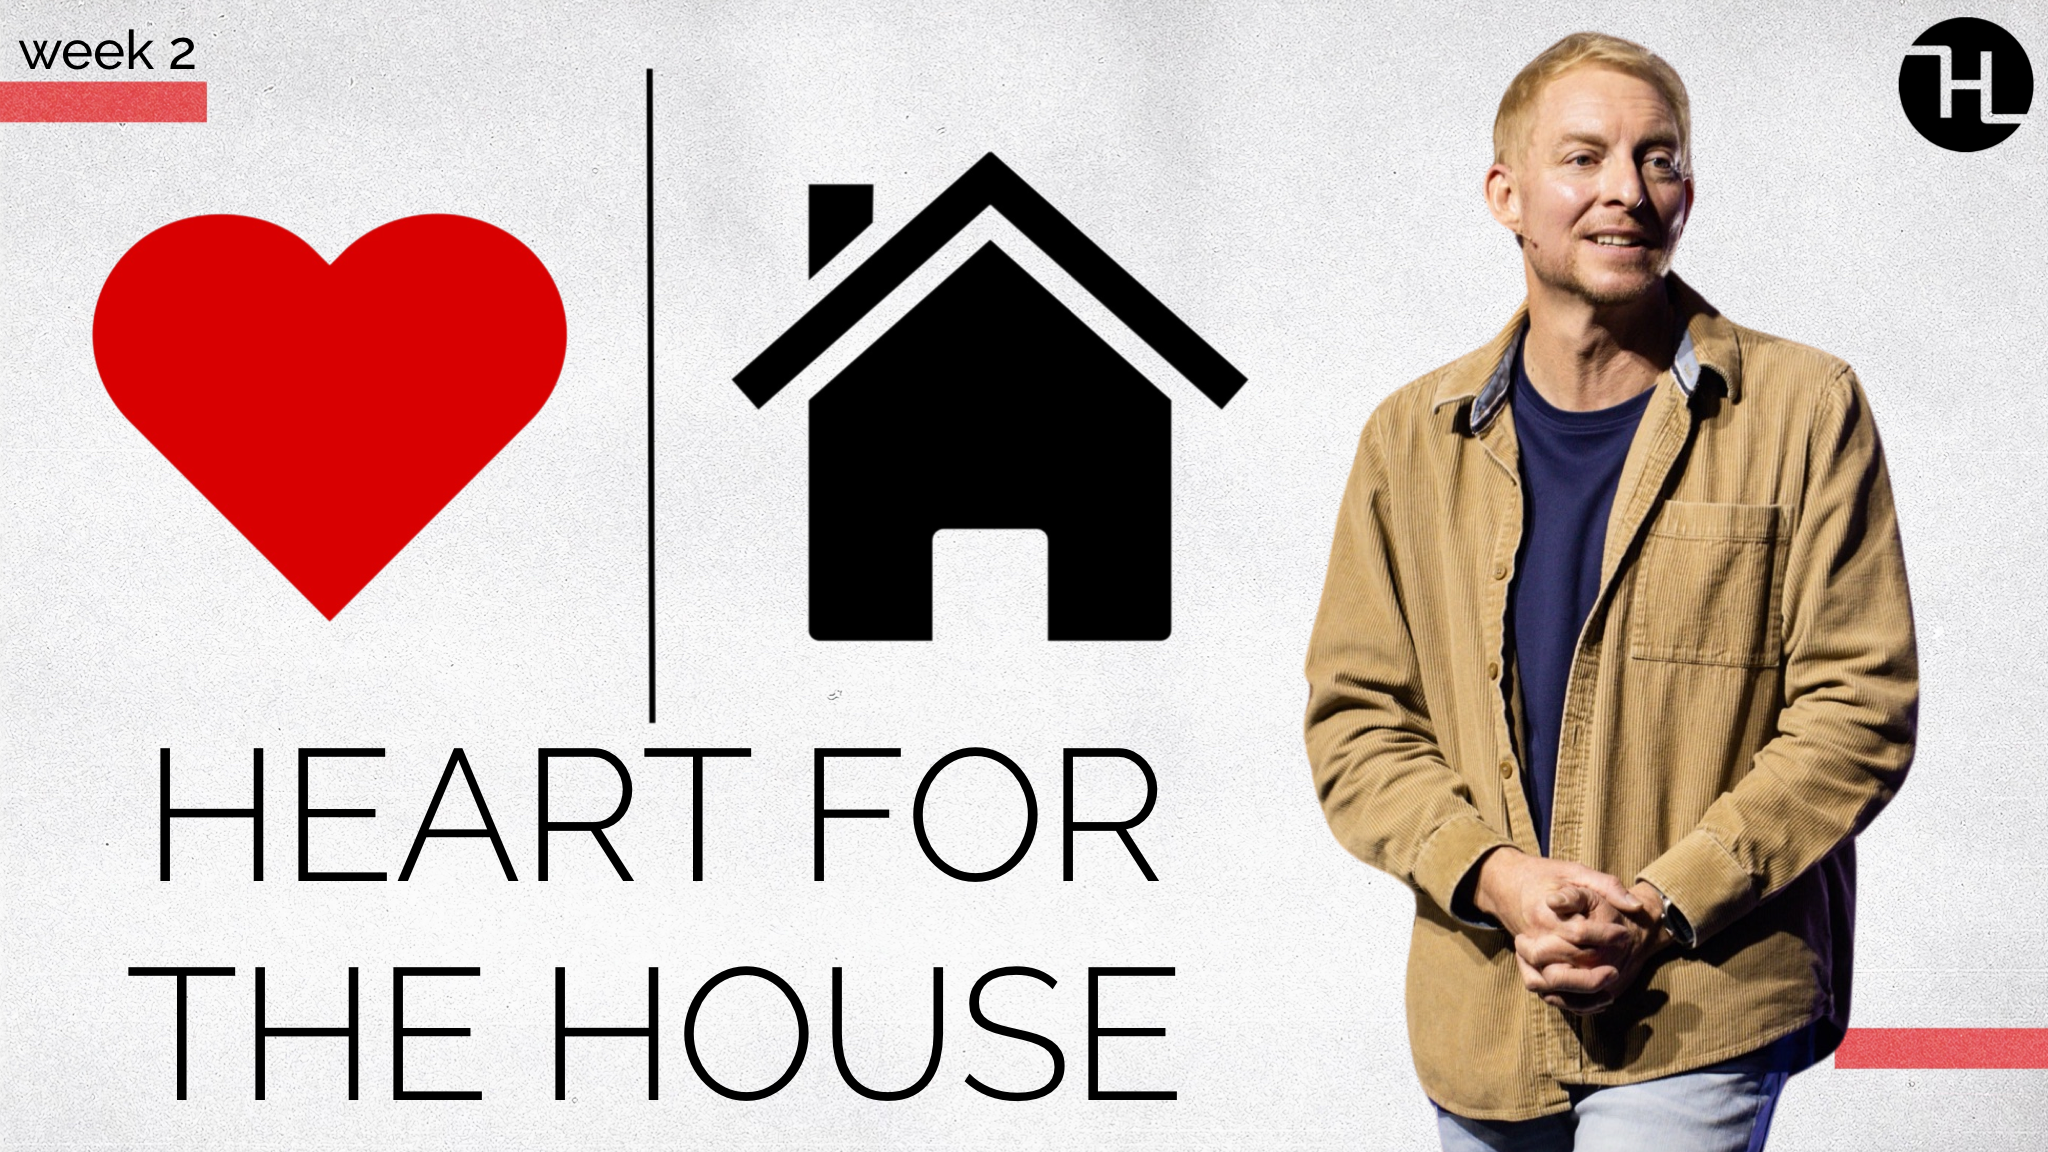 Heart for the House Week 2